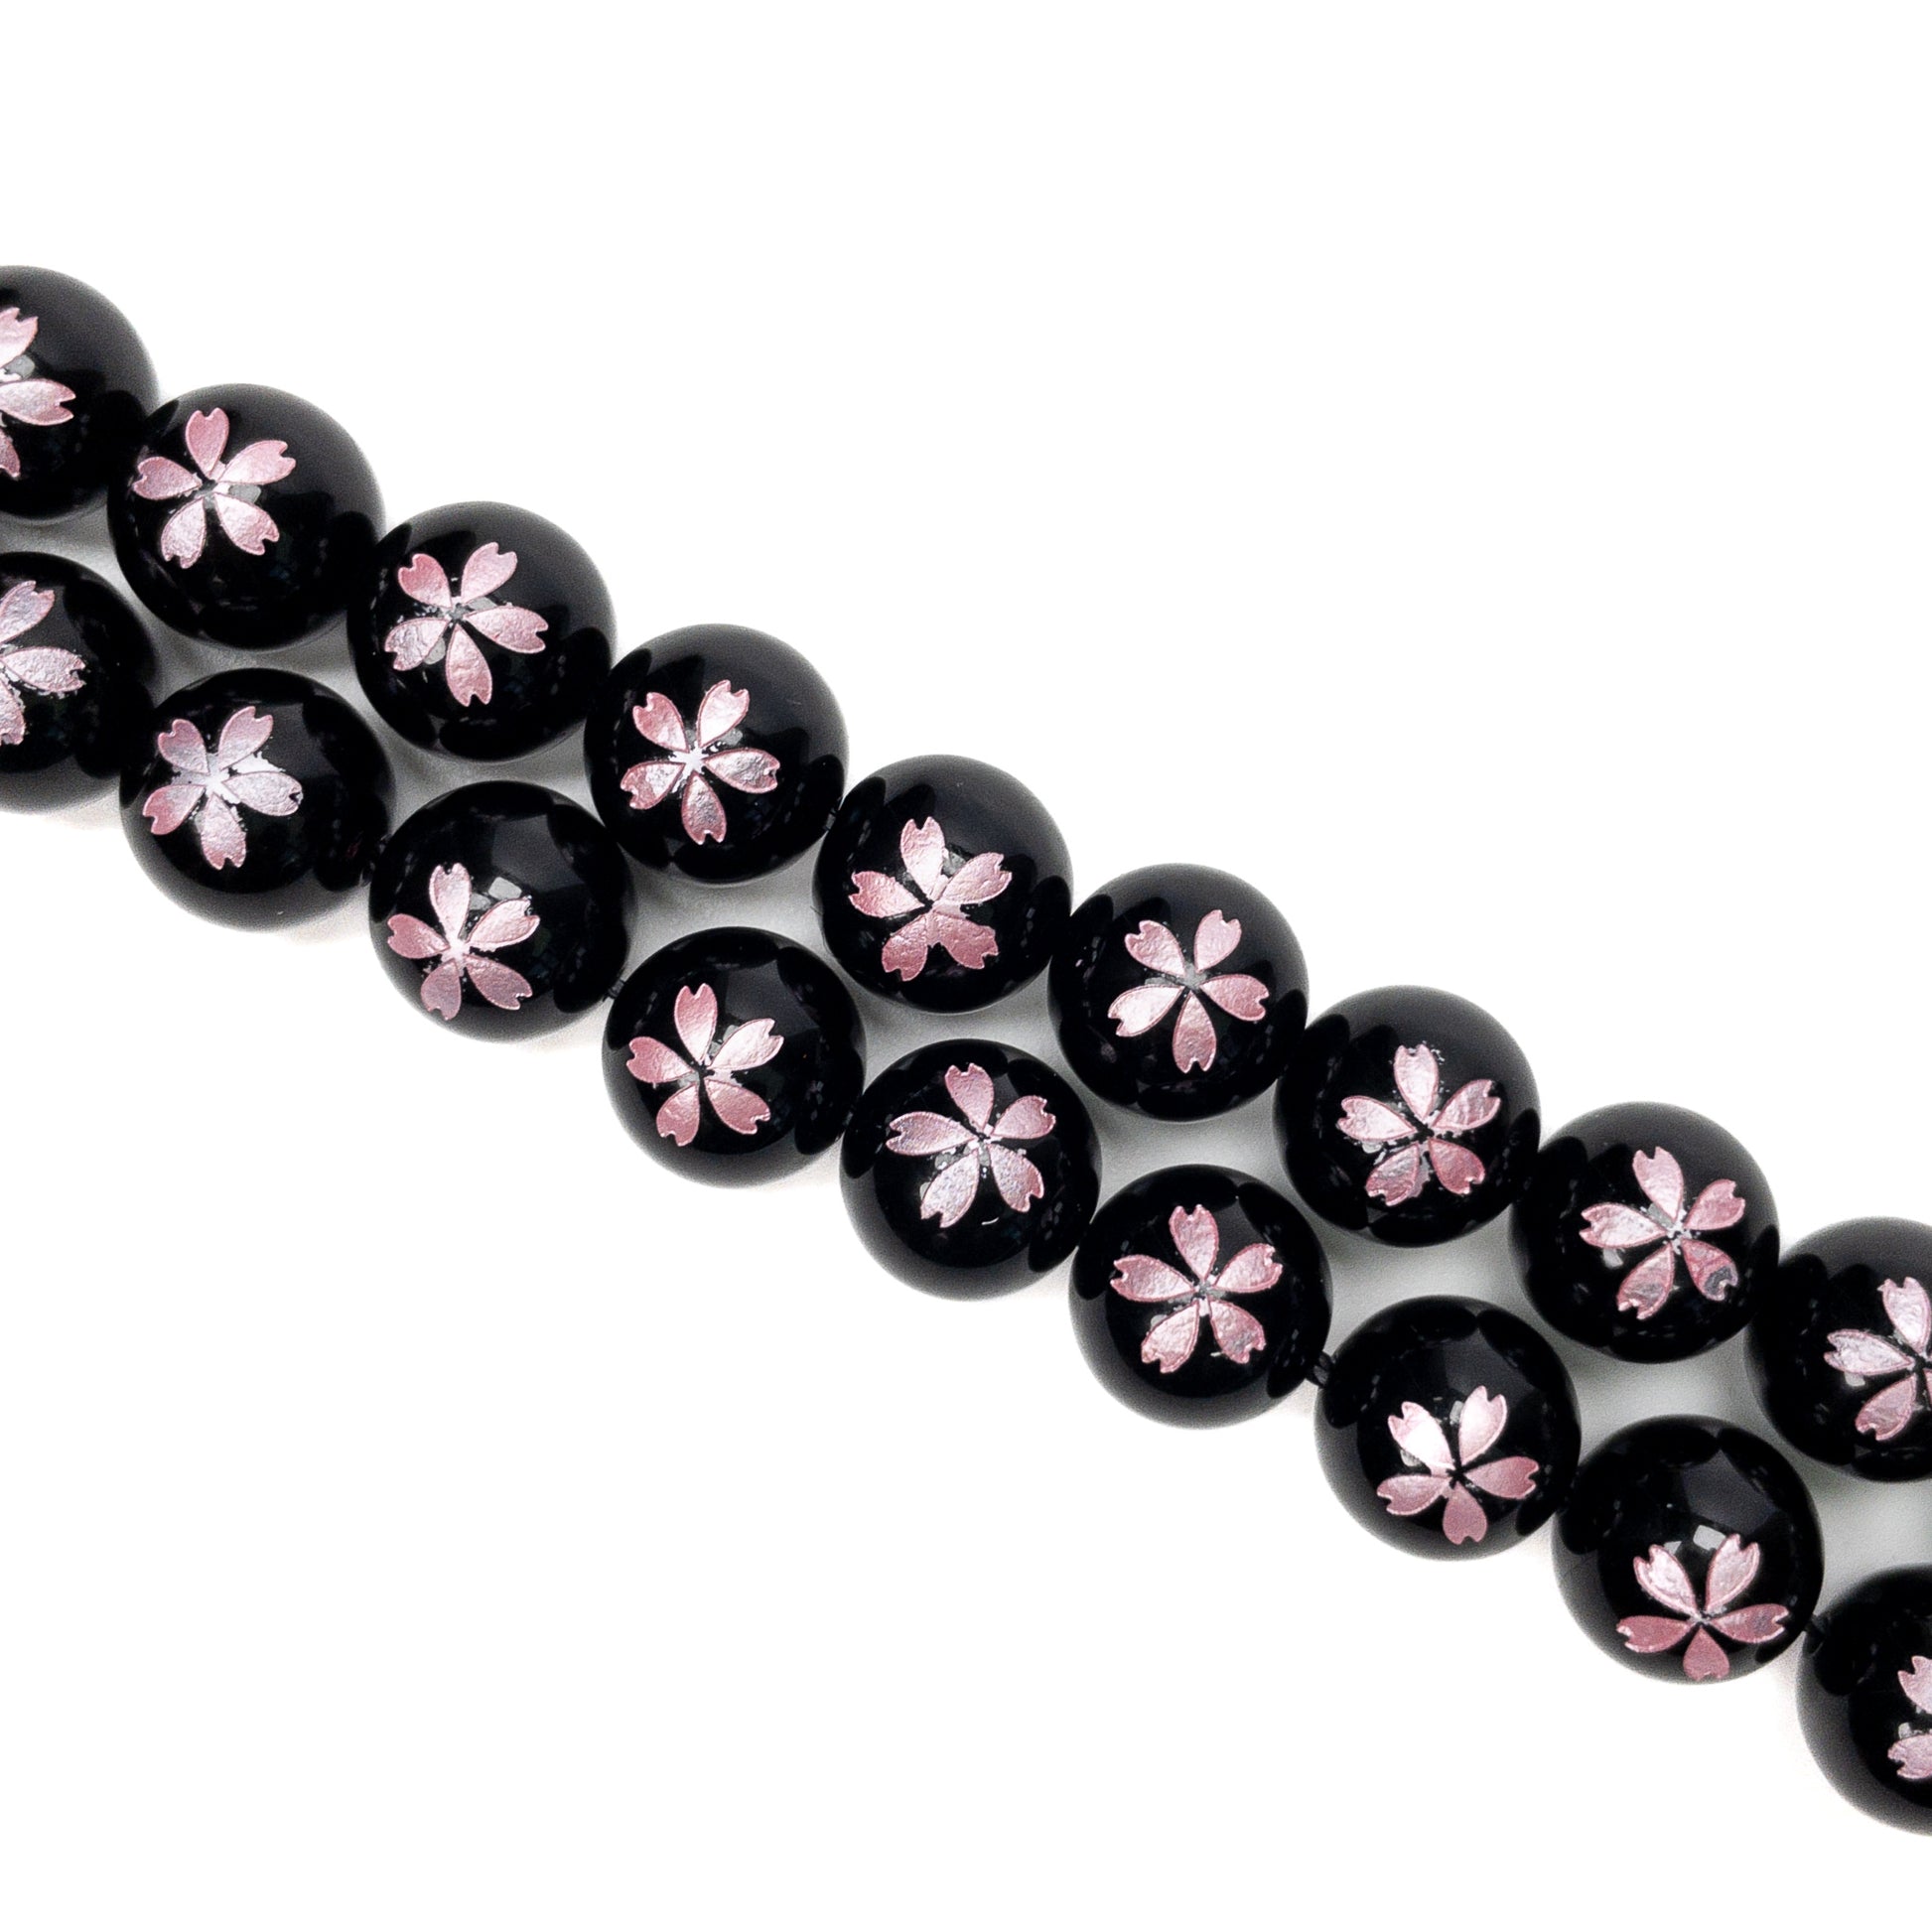 Black Agate with Etched Pink Sakura Blossom 10mm Round Bead - 7.5" Strand